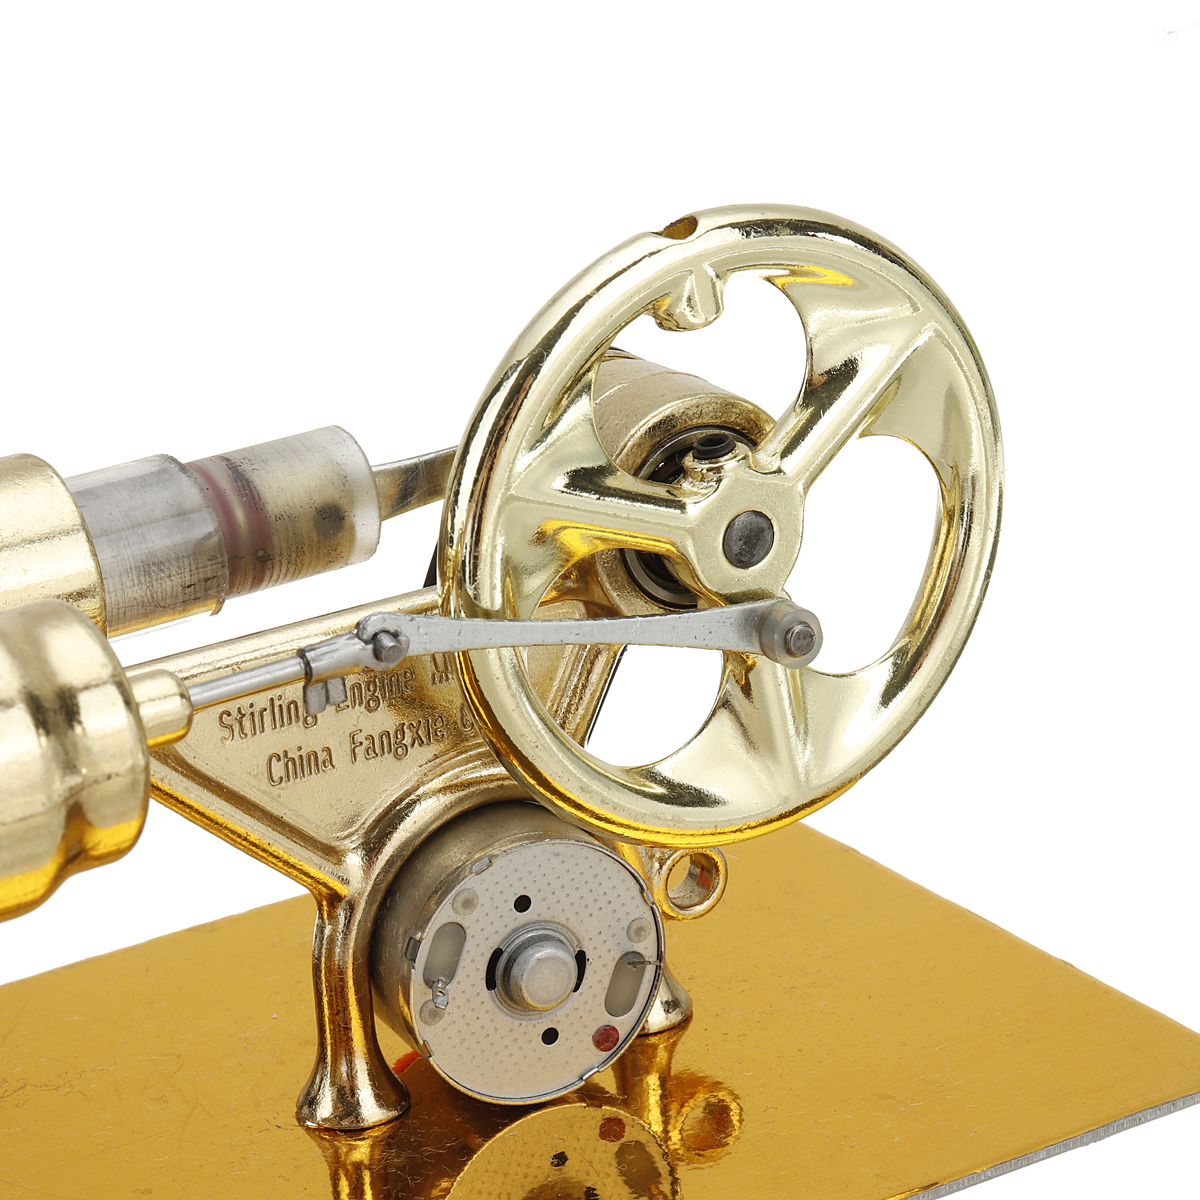 1PC-16-x-85-x-11-cm--Physical-Science-DIY-Kits-Stirling-Engine-Model-with-Parts-1939762-4